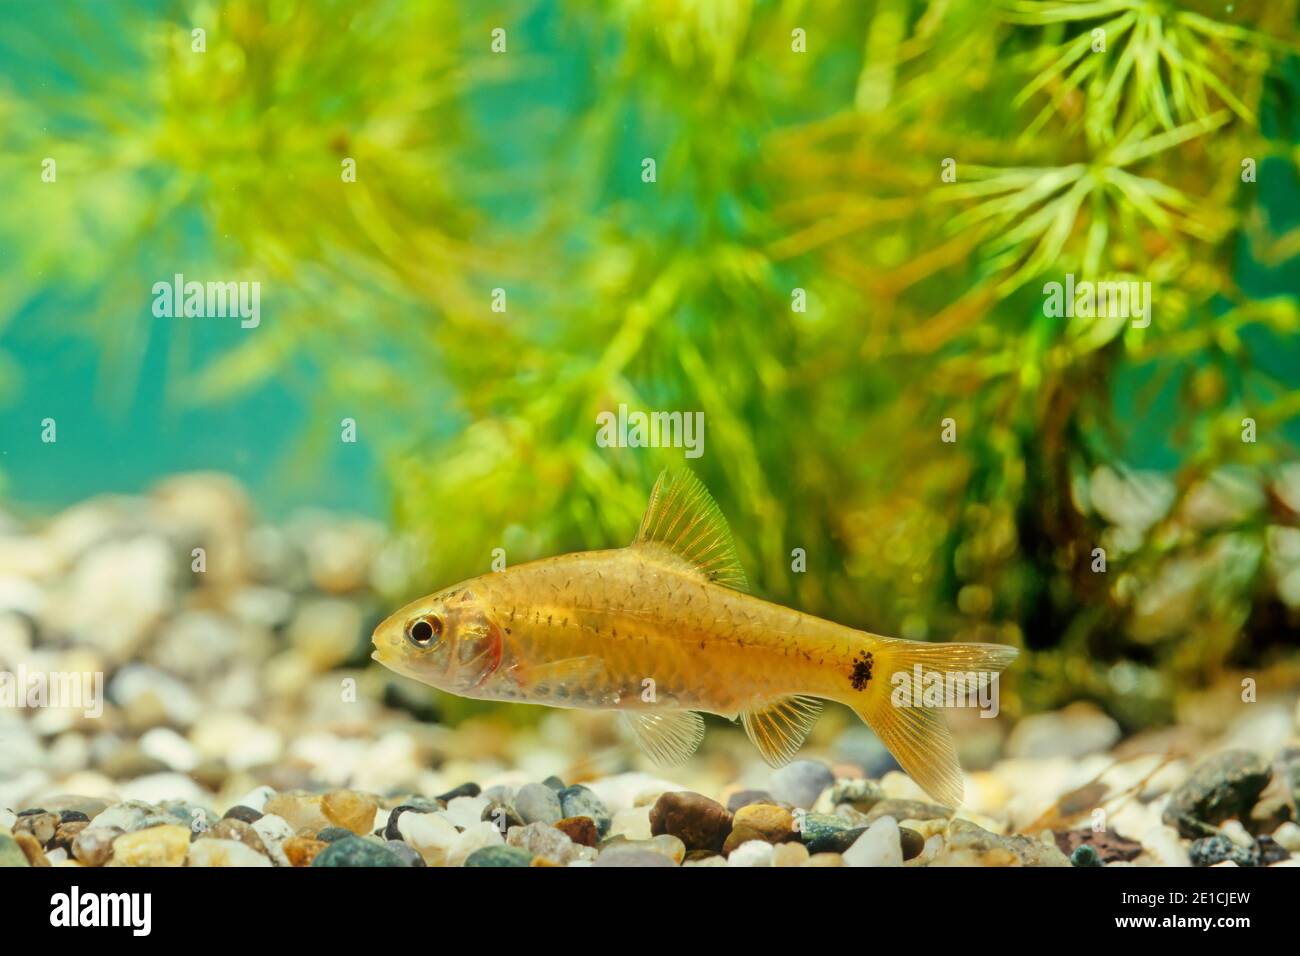 The goldfinned barb (Barbodes semifasciolatus sachsii) is a subspecies of ray-finned fish in the genus Barbodes. Stock Photo